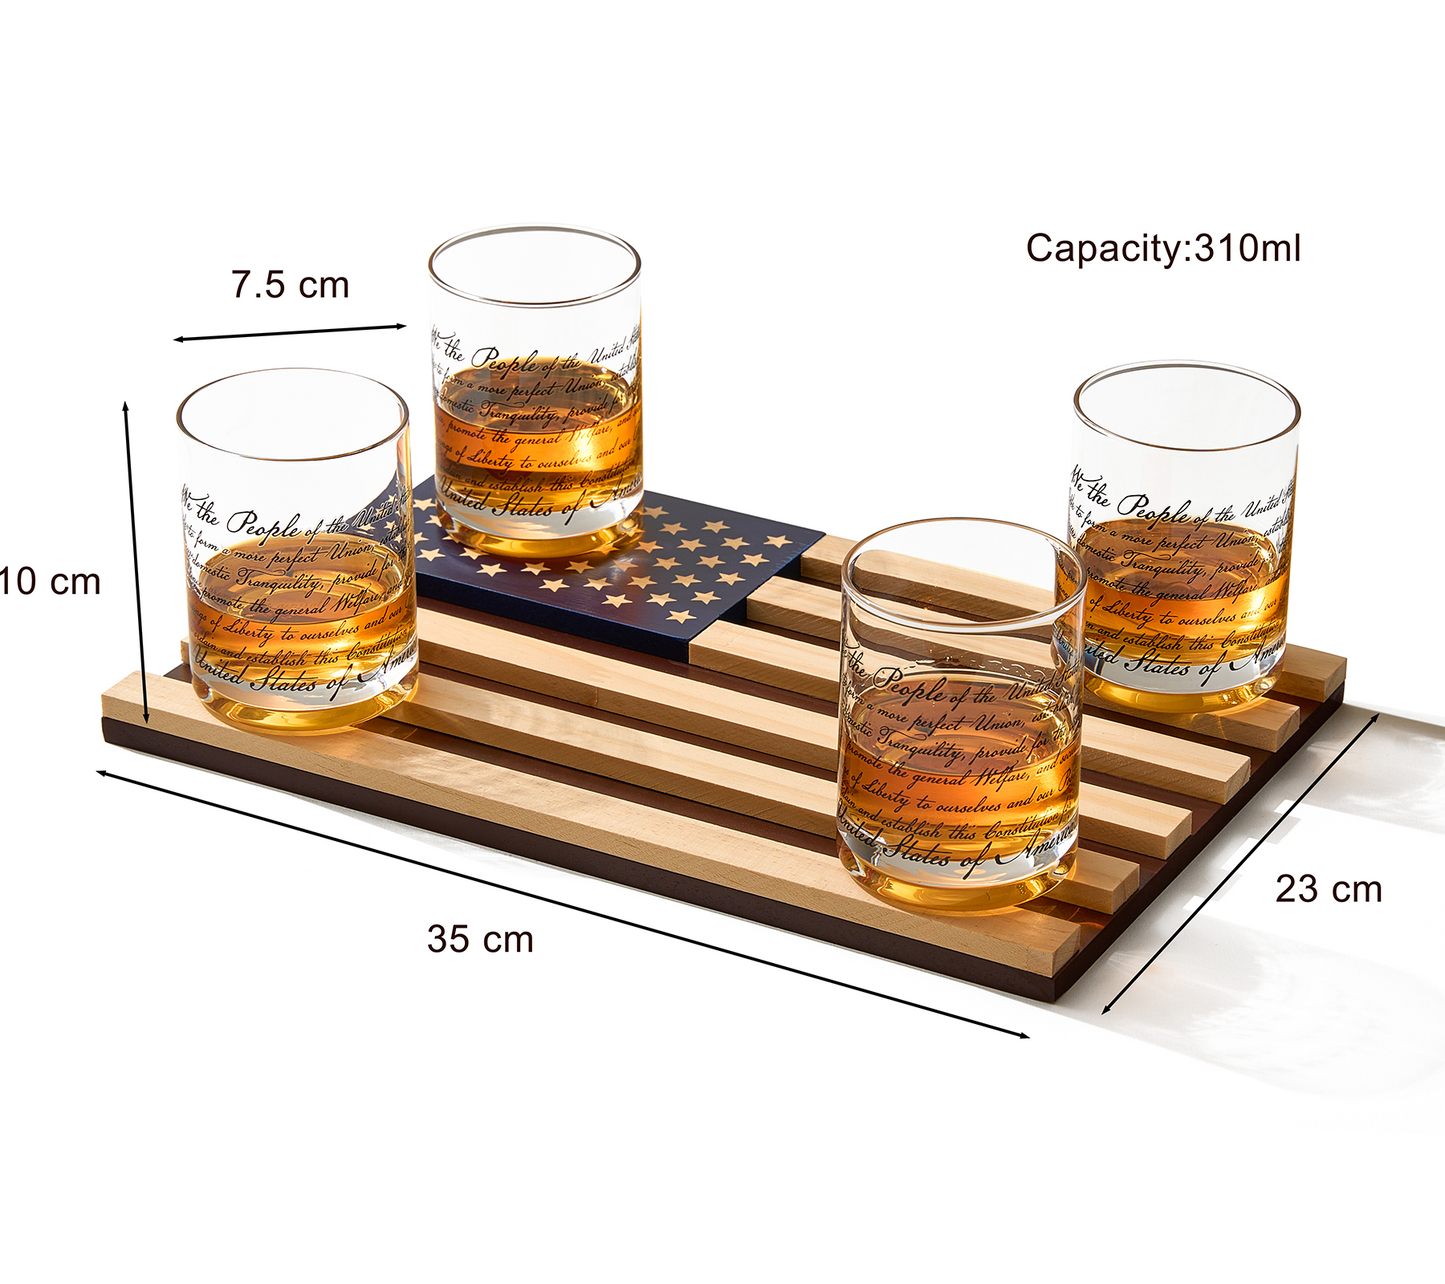 Whiskey Glasses – United States Constitution - Wood American Flag Tray & Set of 4 We The People 10oz America Glassware, Old Fashioned Rocks Glass, Freedom Of Speech Law Gift Set US Patriotic-4